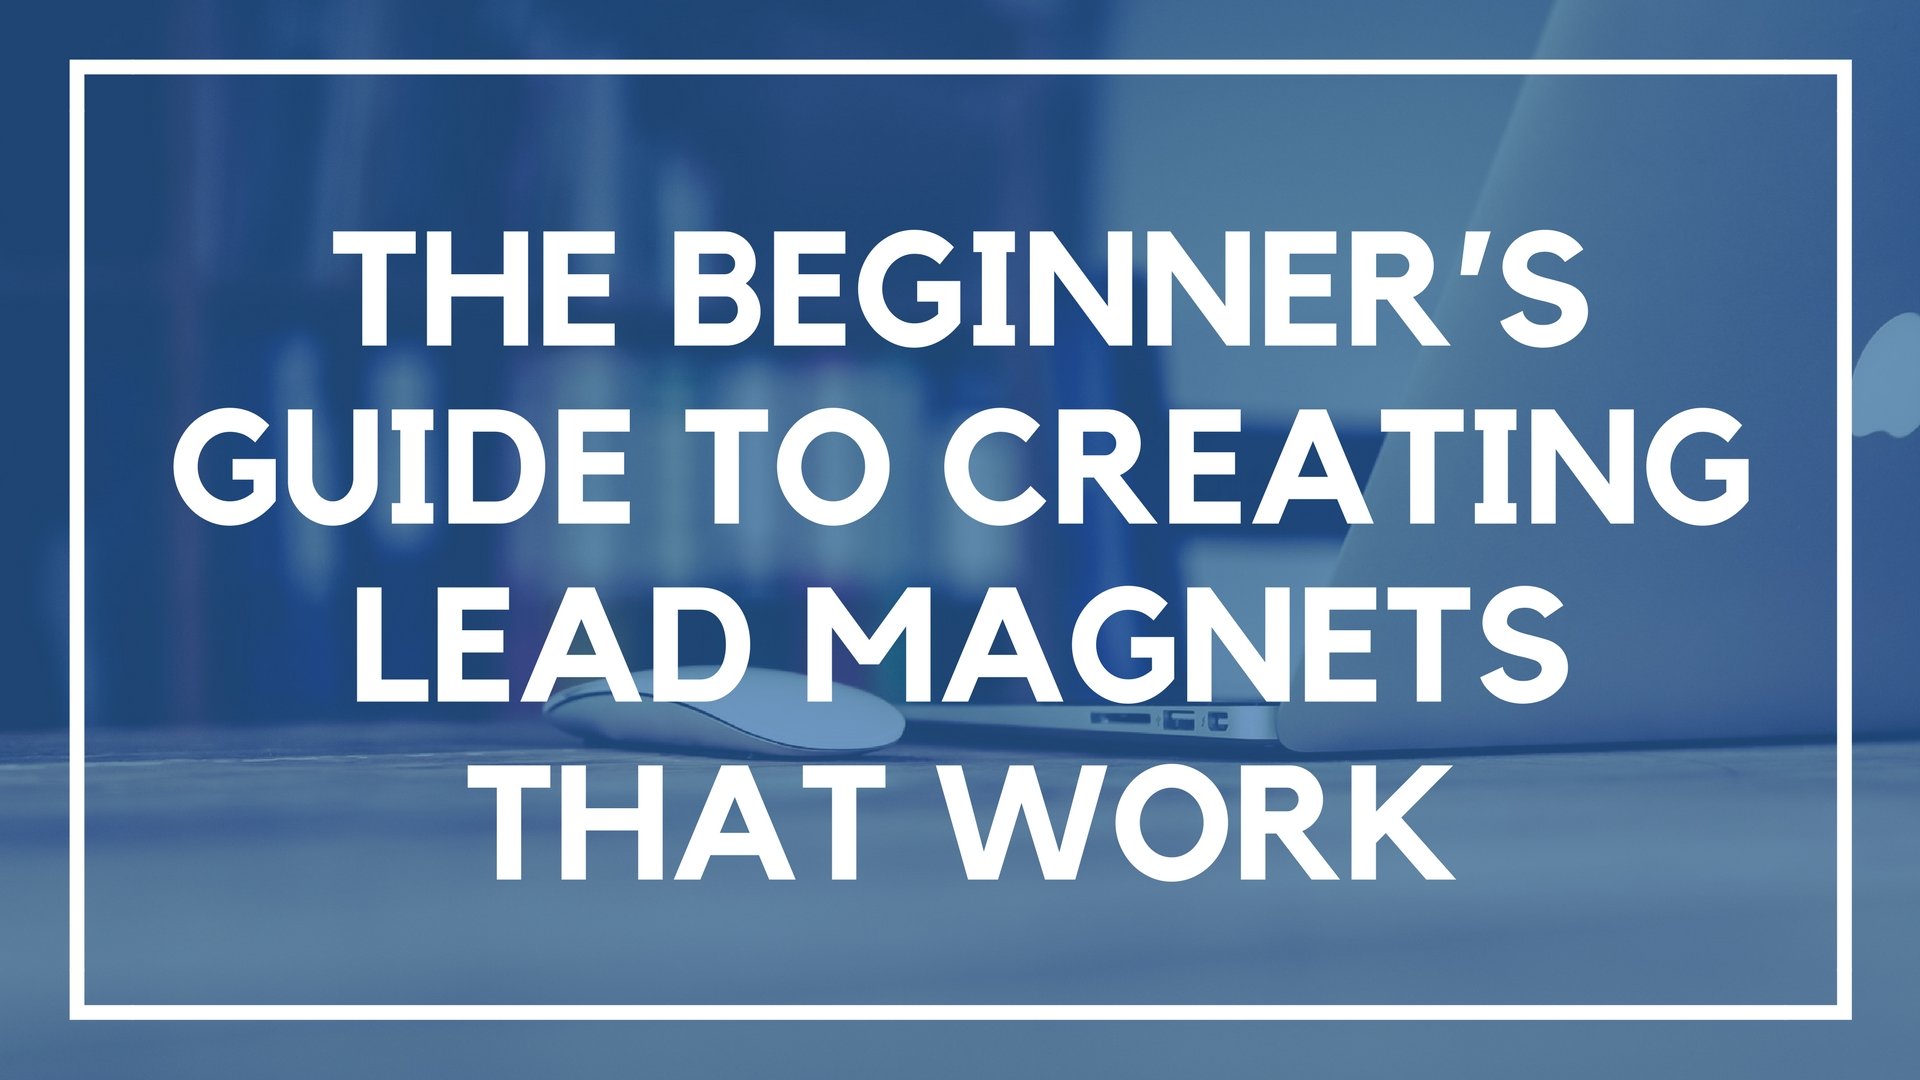 The Beginner’s Guide to Creating Lead Magnets that Work